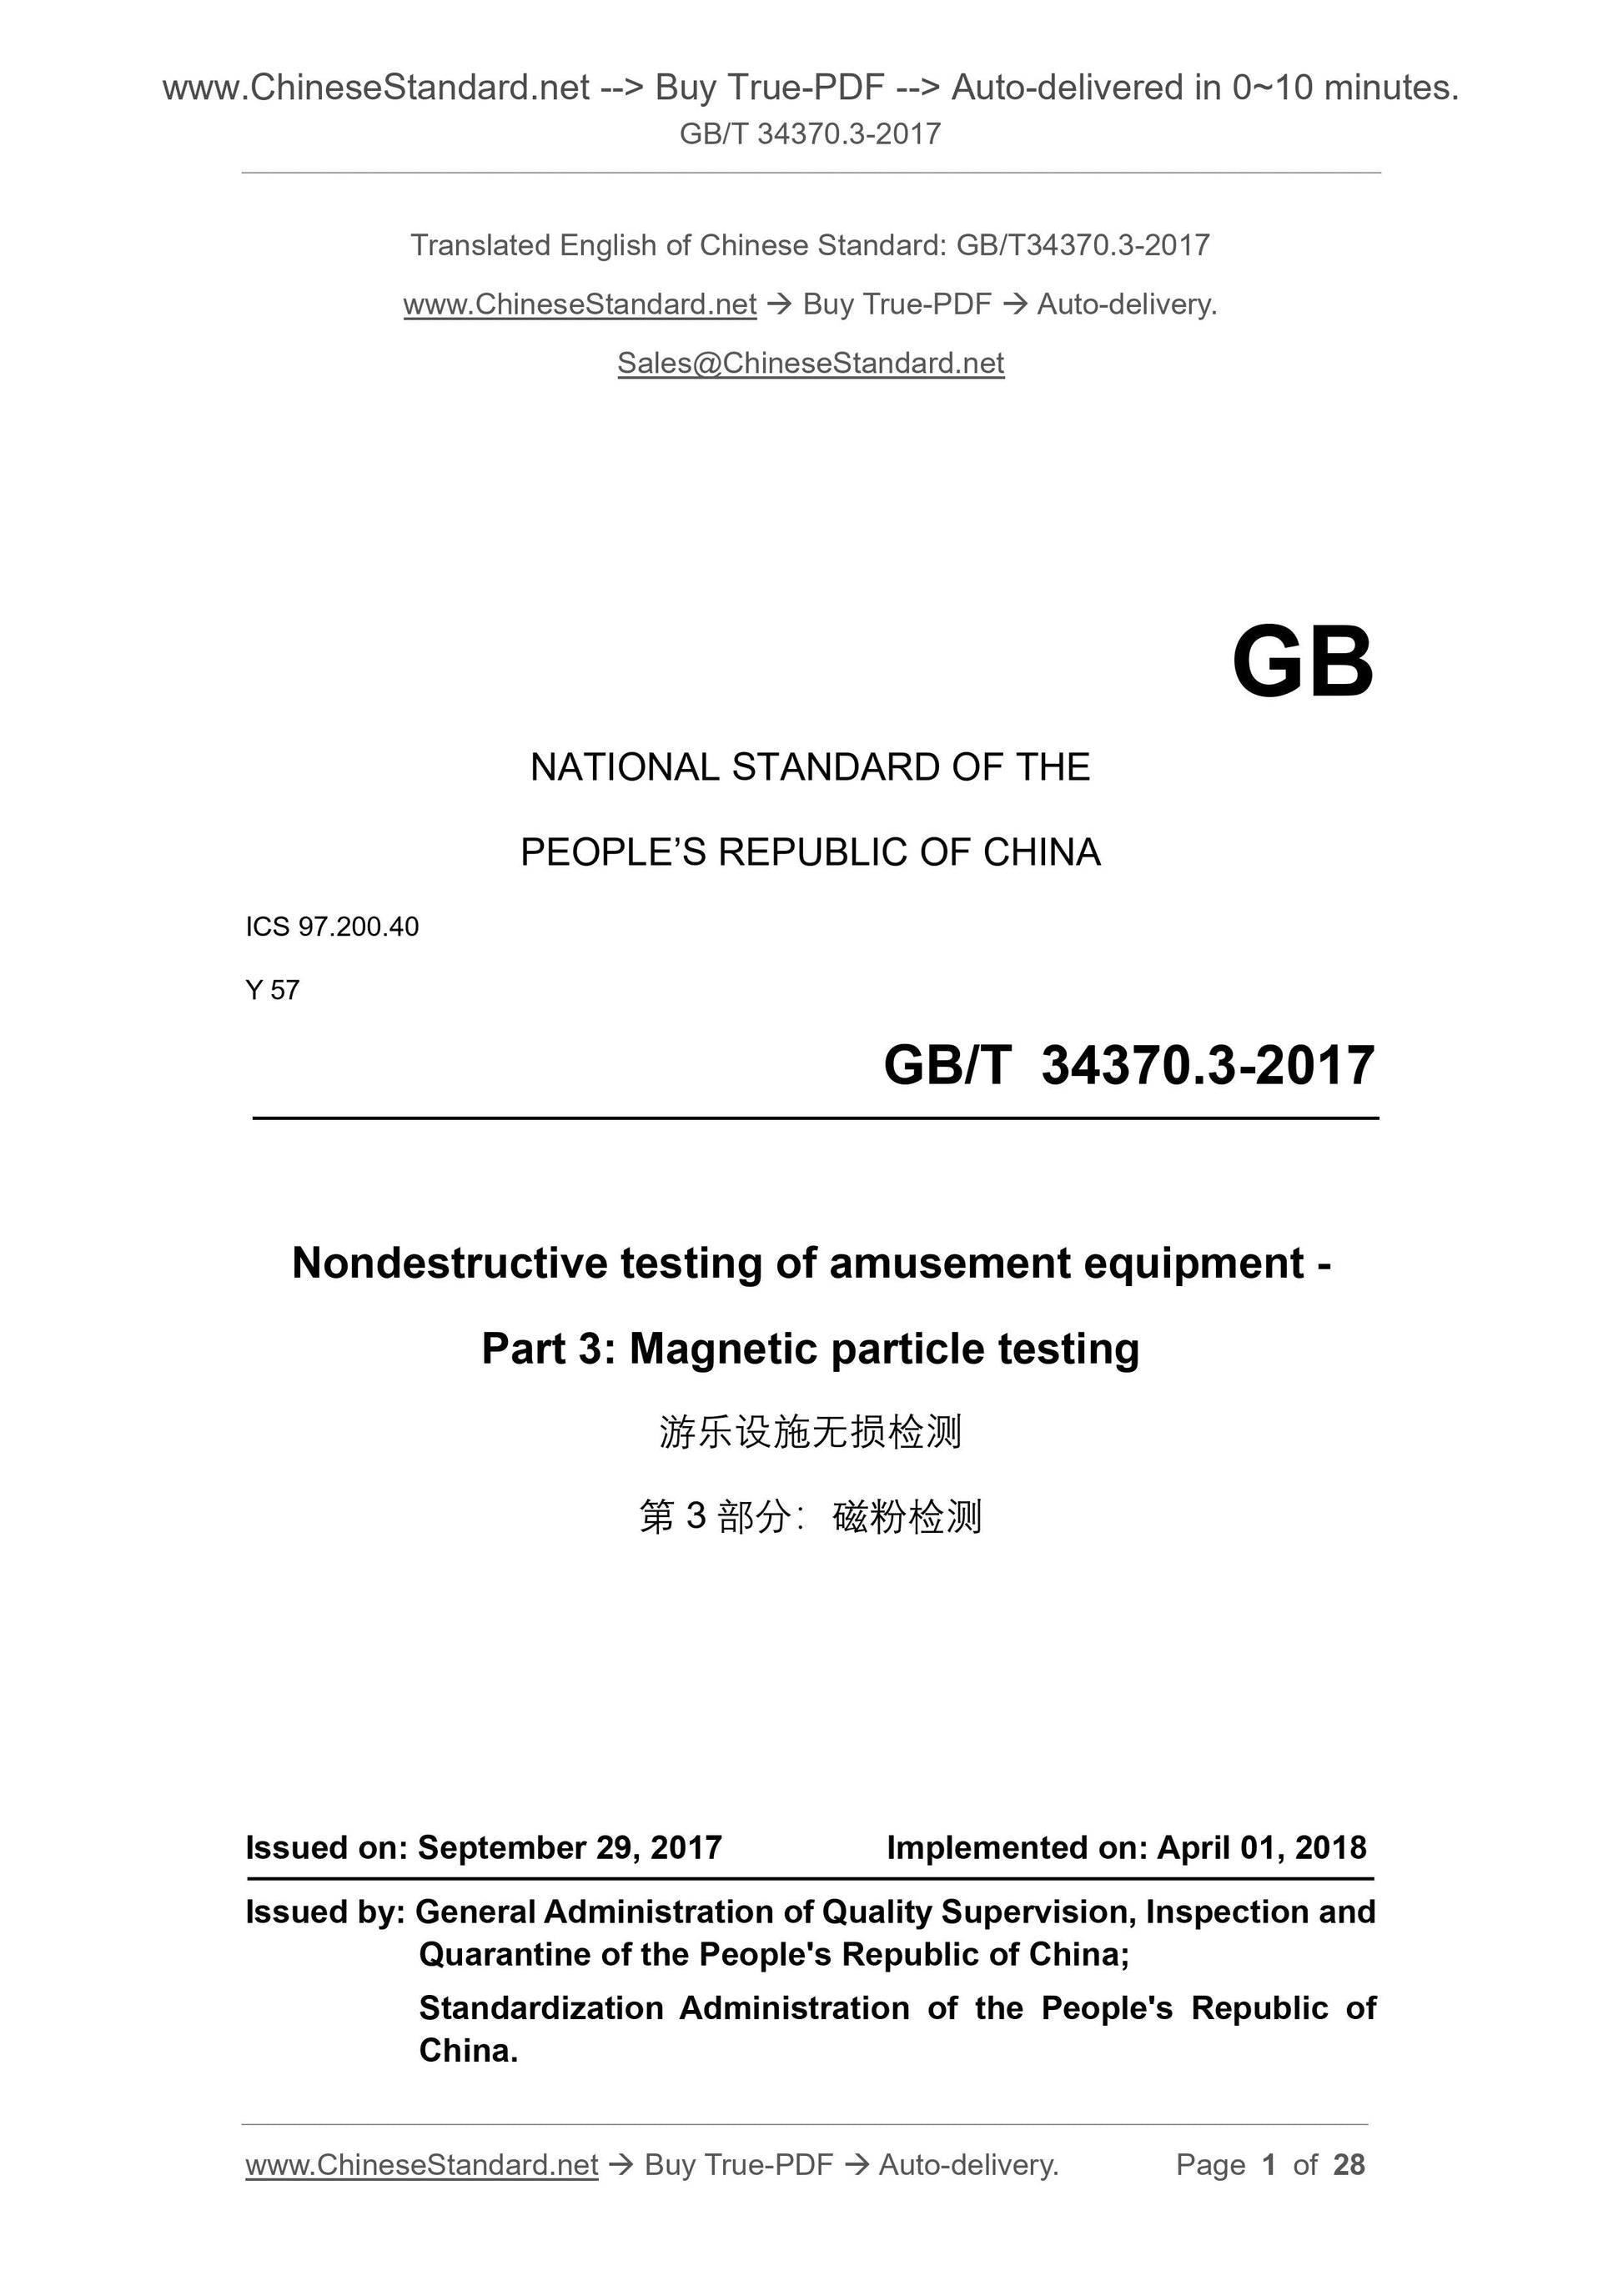 GB/T 34370.3-2017 Page 1